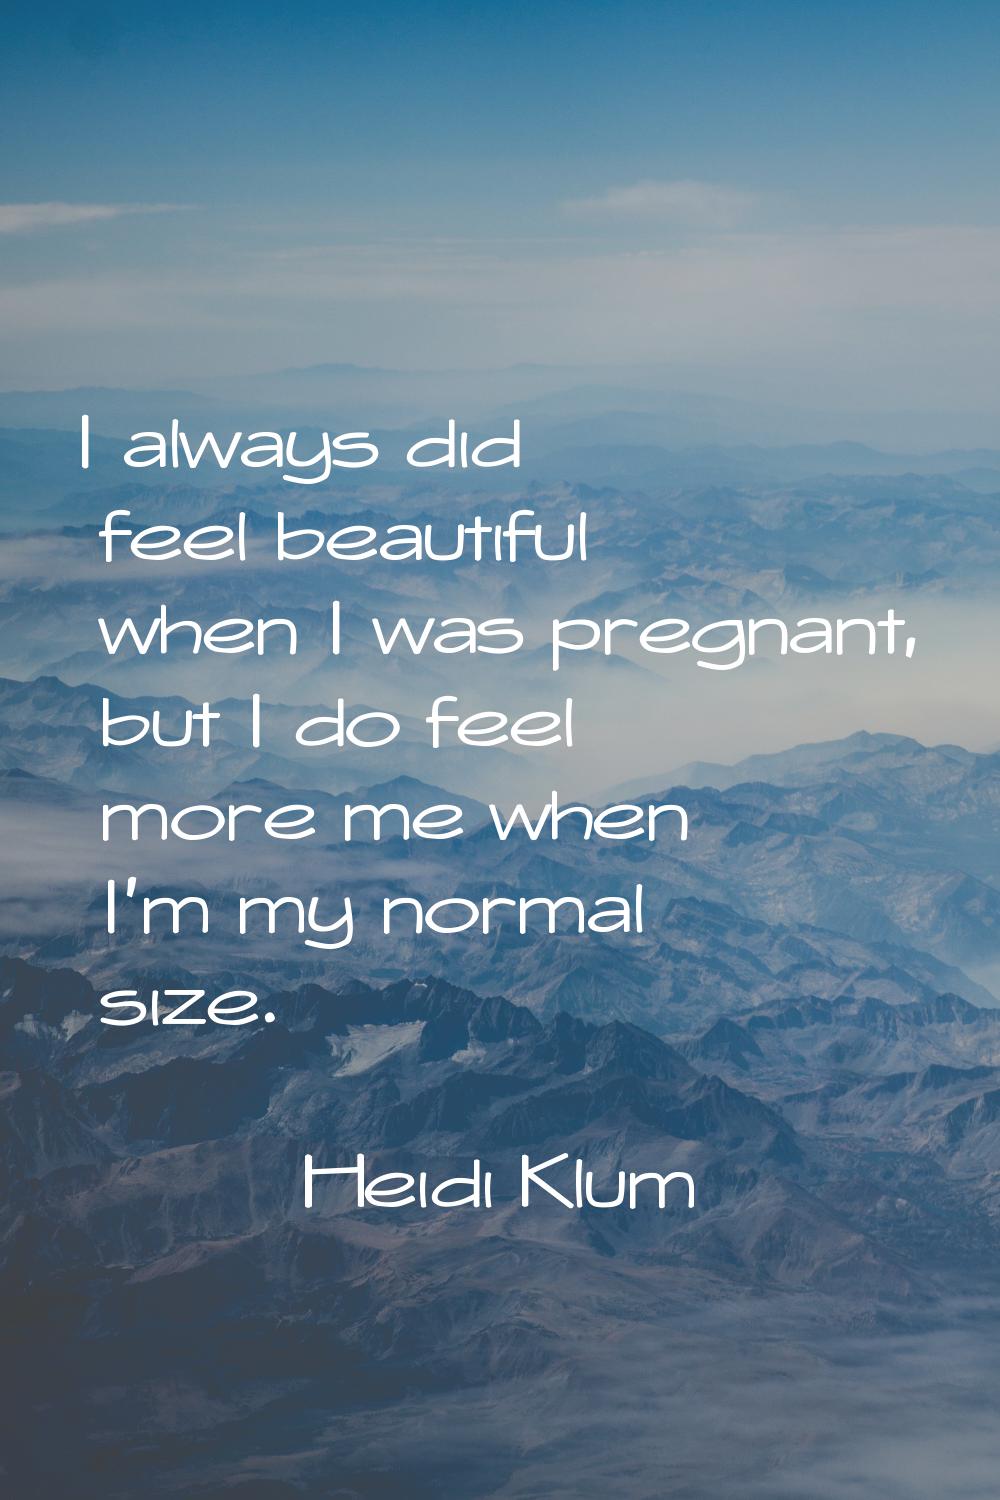 I always did feel beautiful when I was pregnant, but I do feel more me when I'm my normal size.